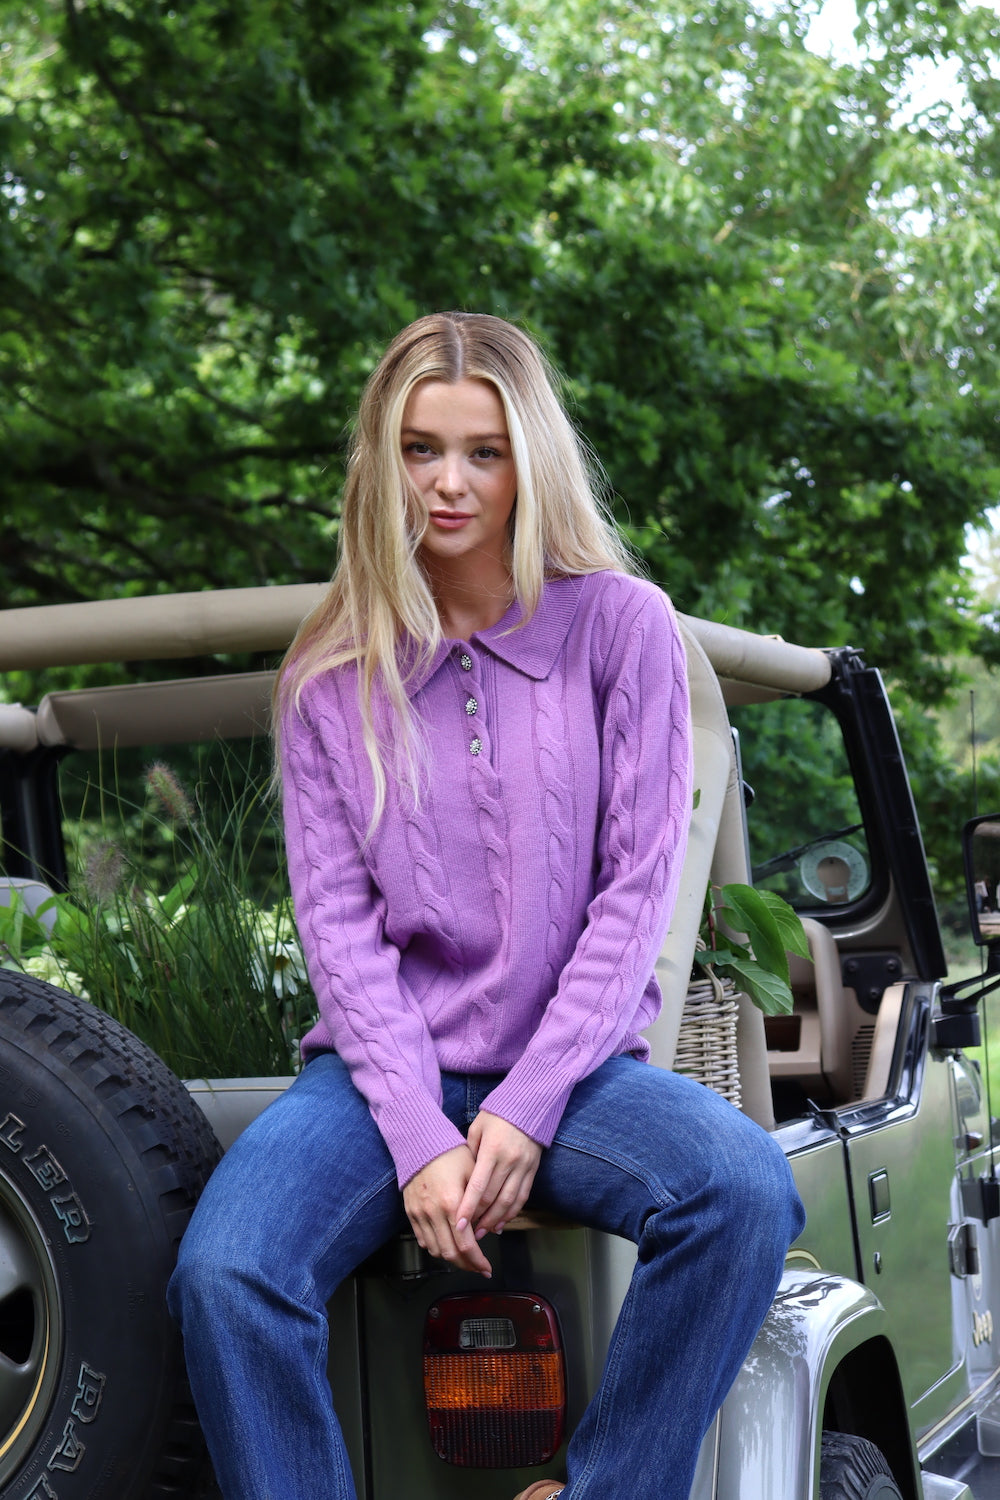 O'TAY Dolly Sweater Blouses Dark Violet